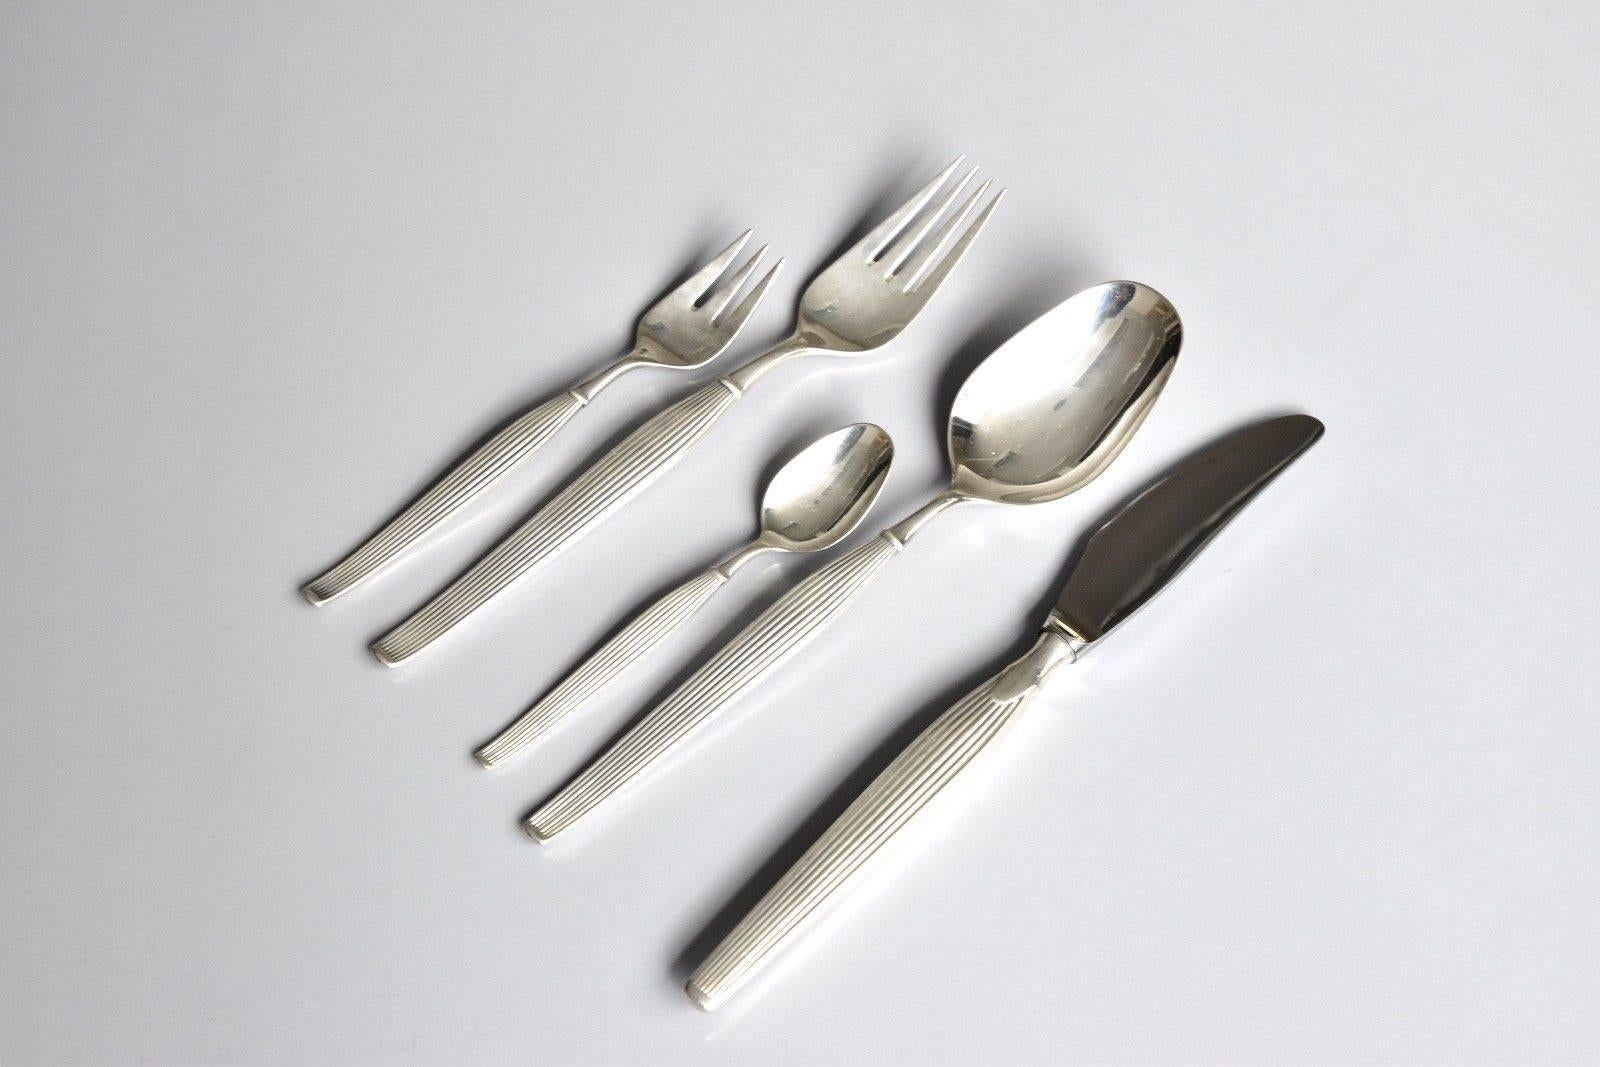 Incredible nice set of cutlery by Danish Designer Henning Seidelin from the 1960s.
The name of this model is 